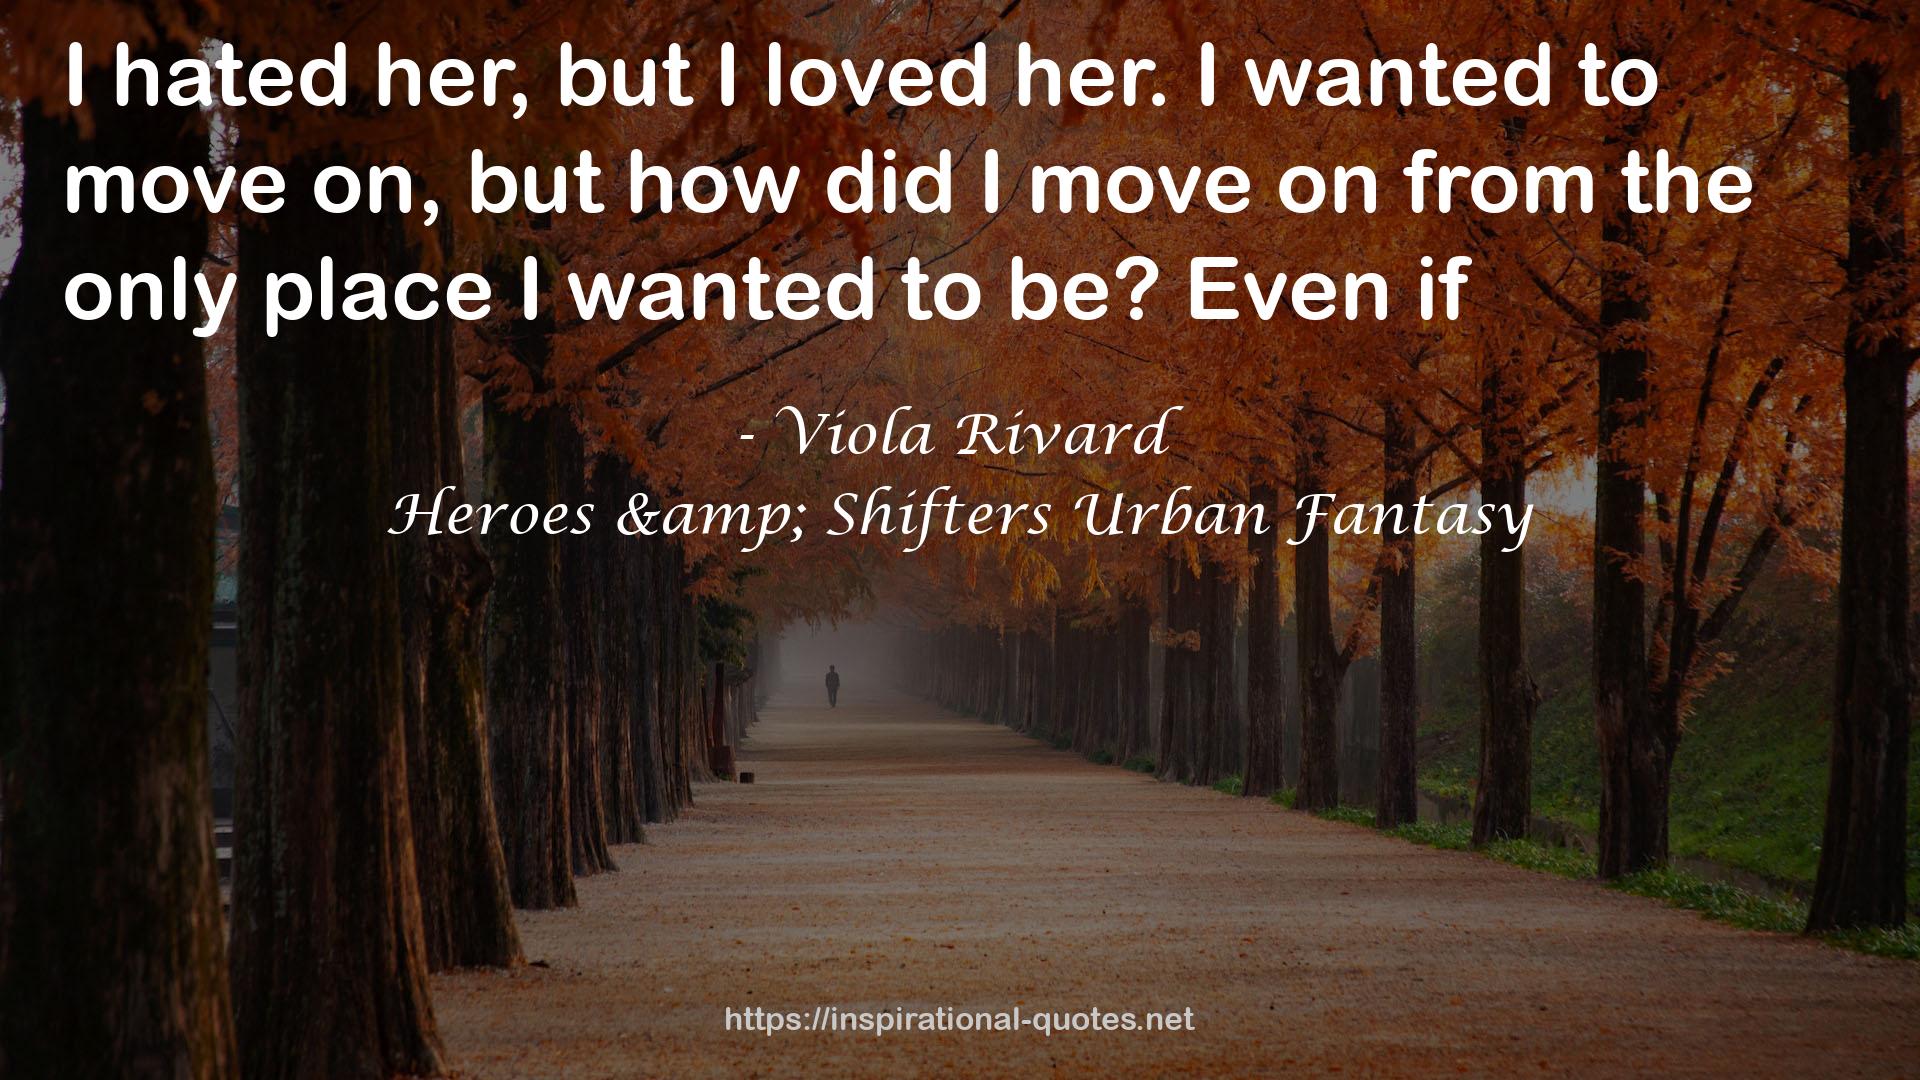 Heroes & Shifters Urban Fantasy QUOTES